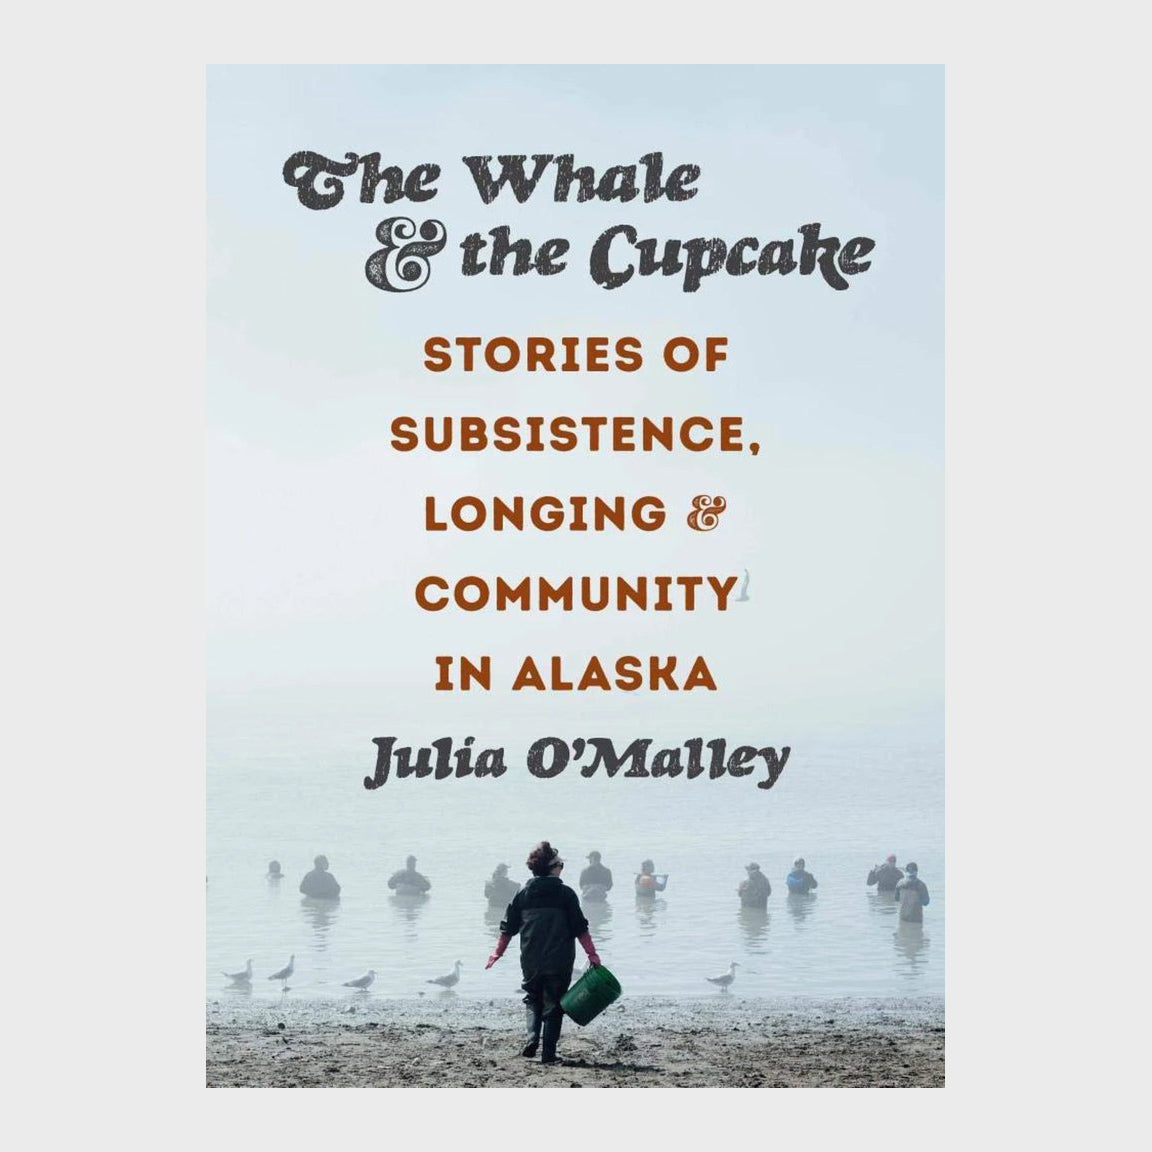 The Whale and the Cupcake: Stories of Subsistence, Longing, and Community in Alaska by Julia O'Malley